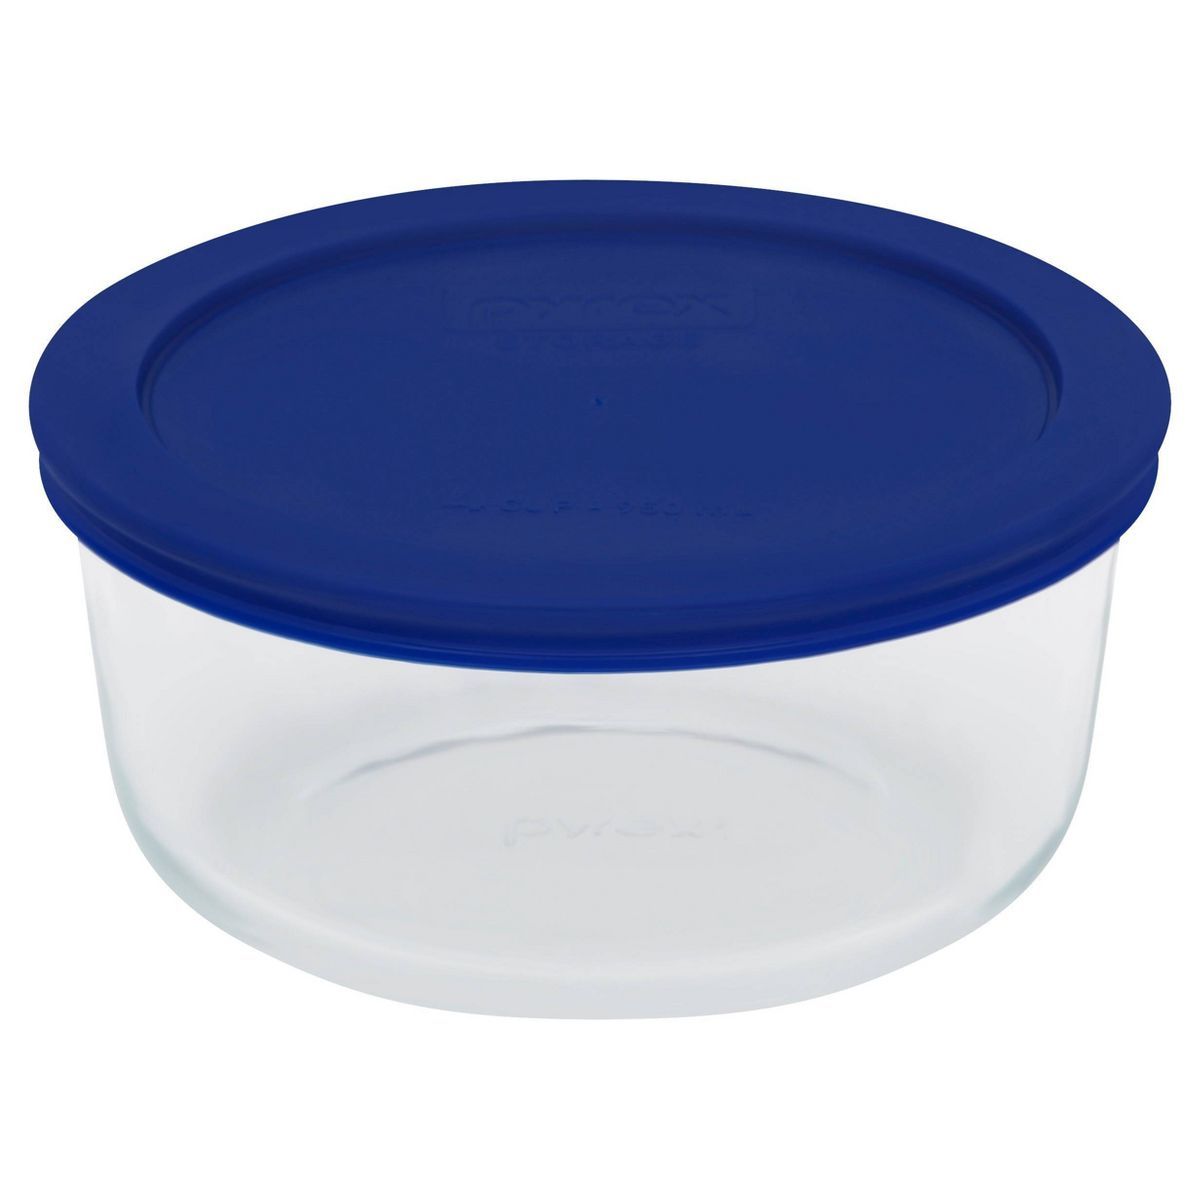 Pyrex 4 Cup Glass Round Storage Container Blue | Target